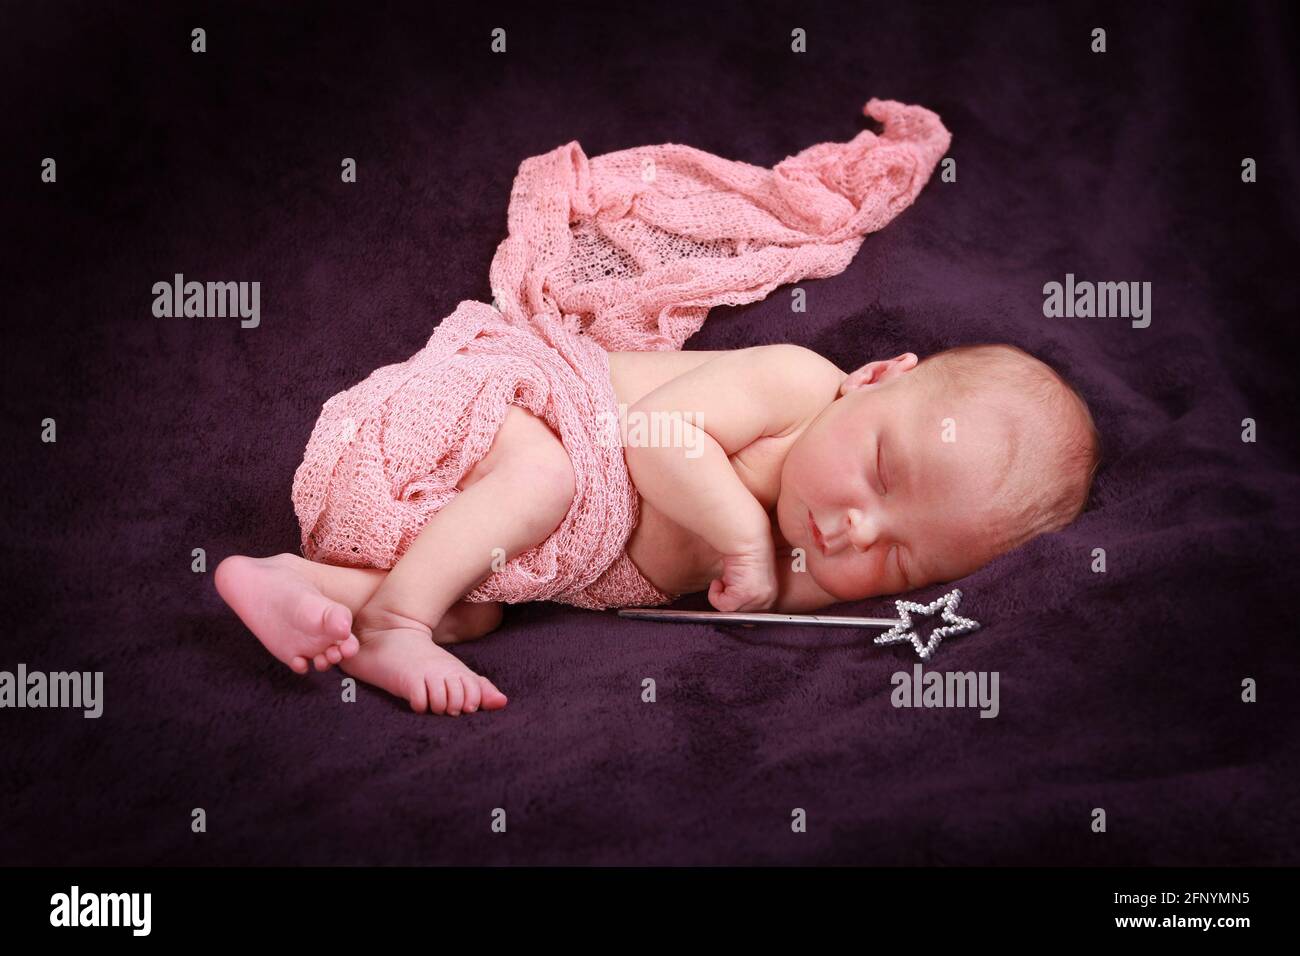 baby girl sleeping in a blanket, 10 day old baby girl Stock Photo